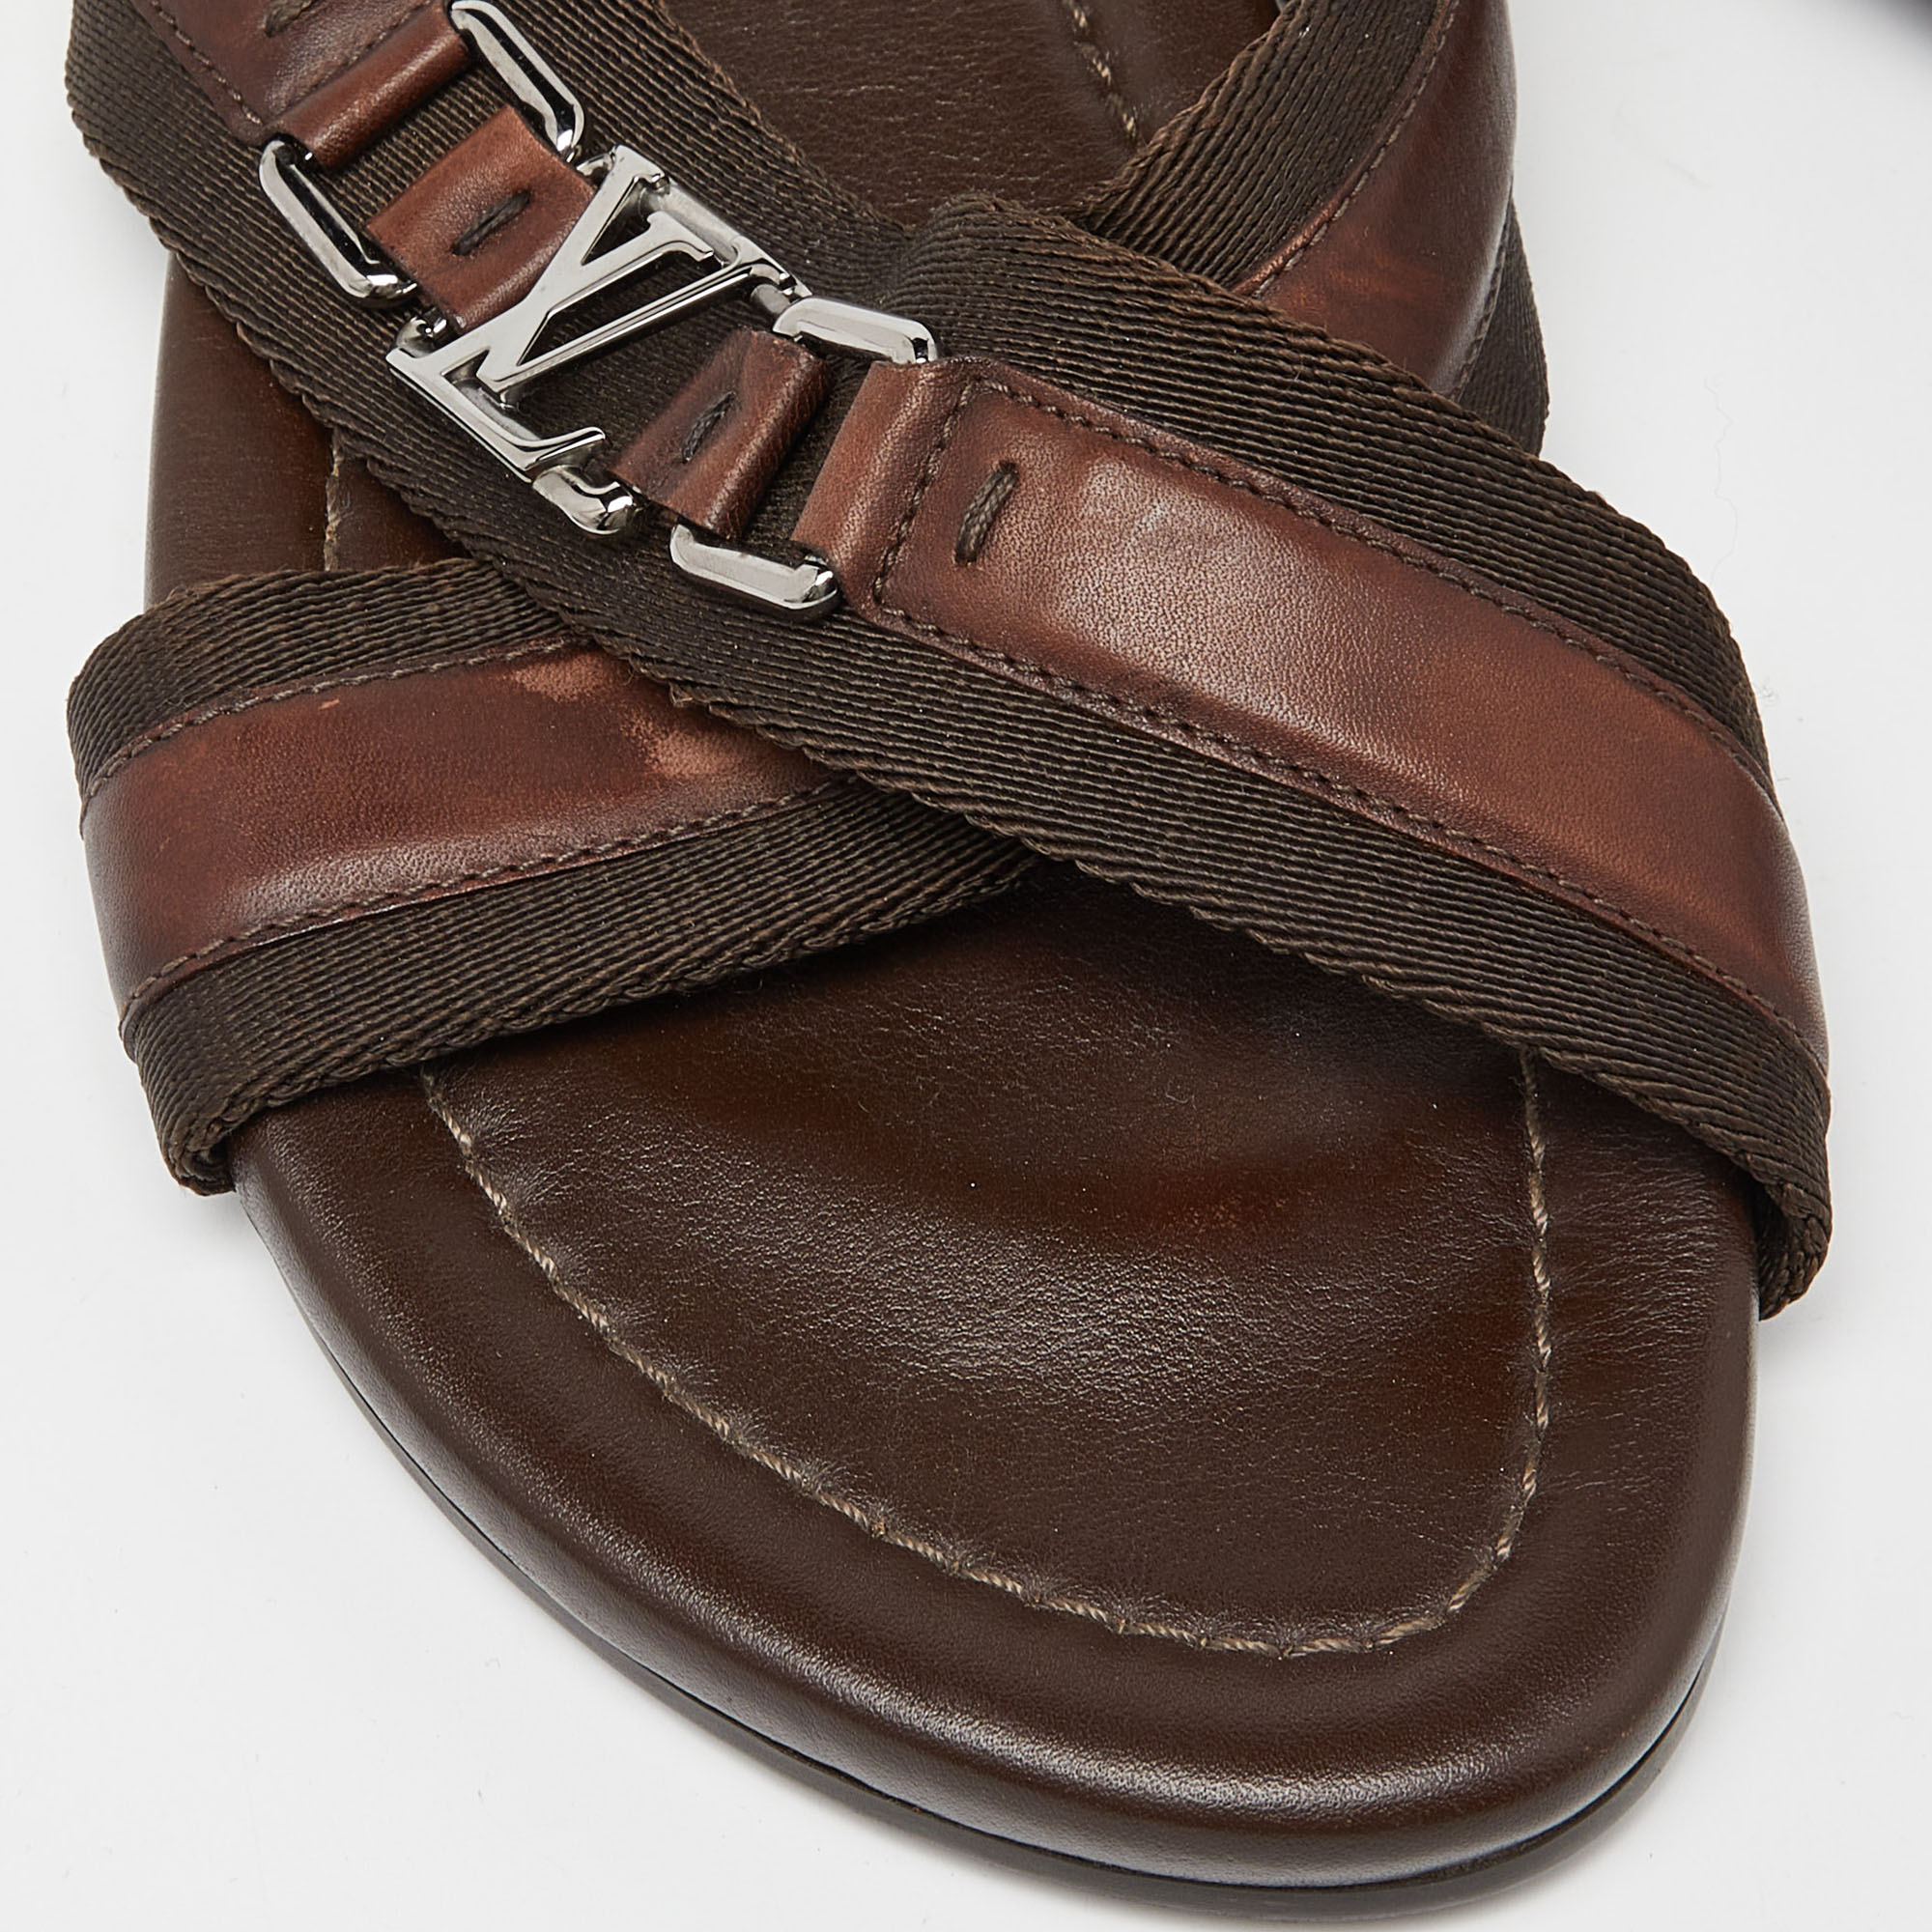 Louis Vuitton Brown Leather And Canvas Criss Cross Flat Slides Size 43